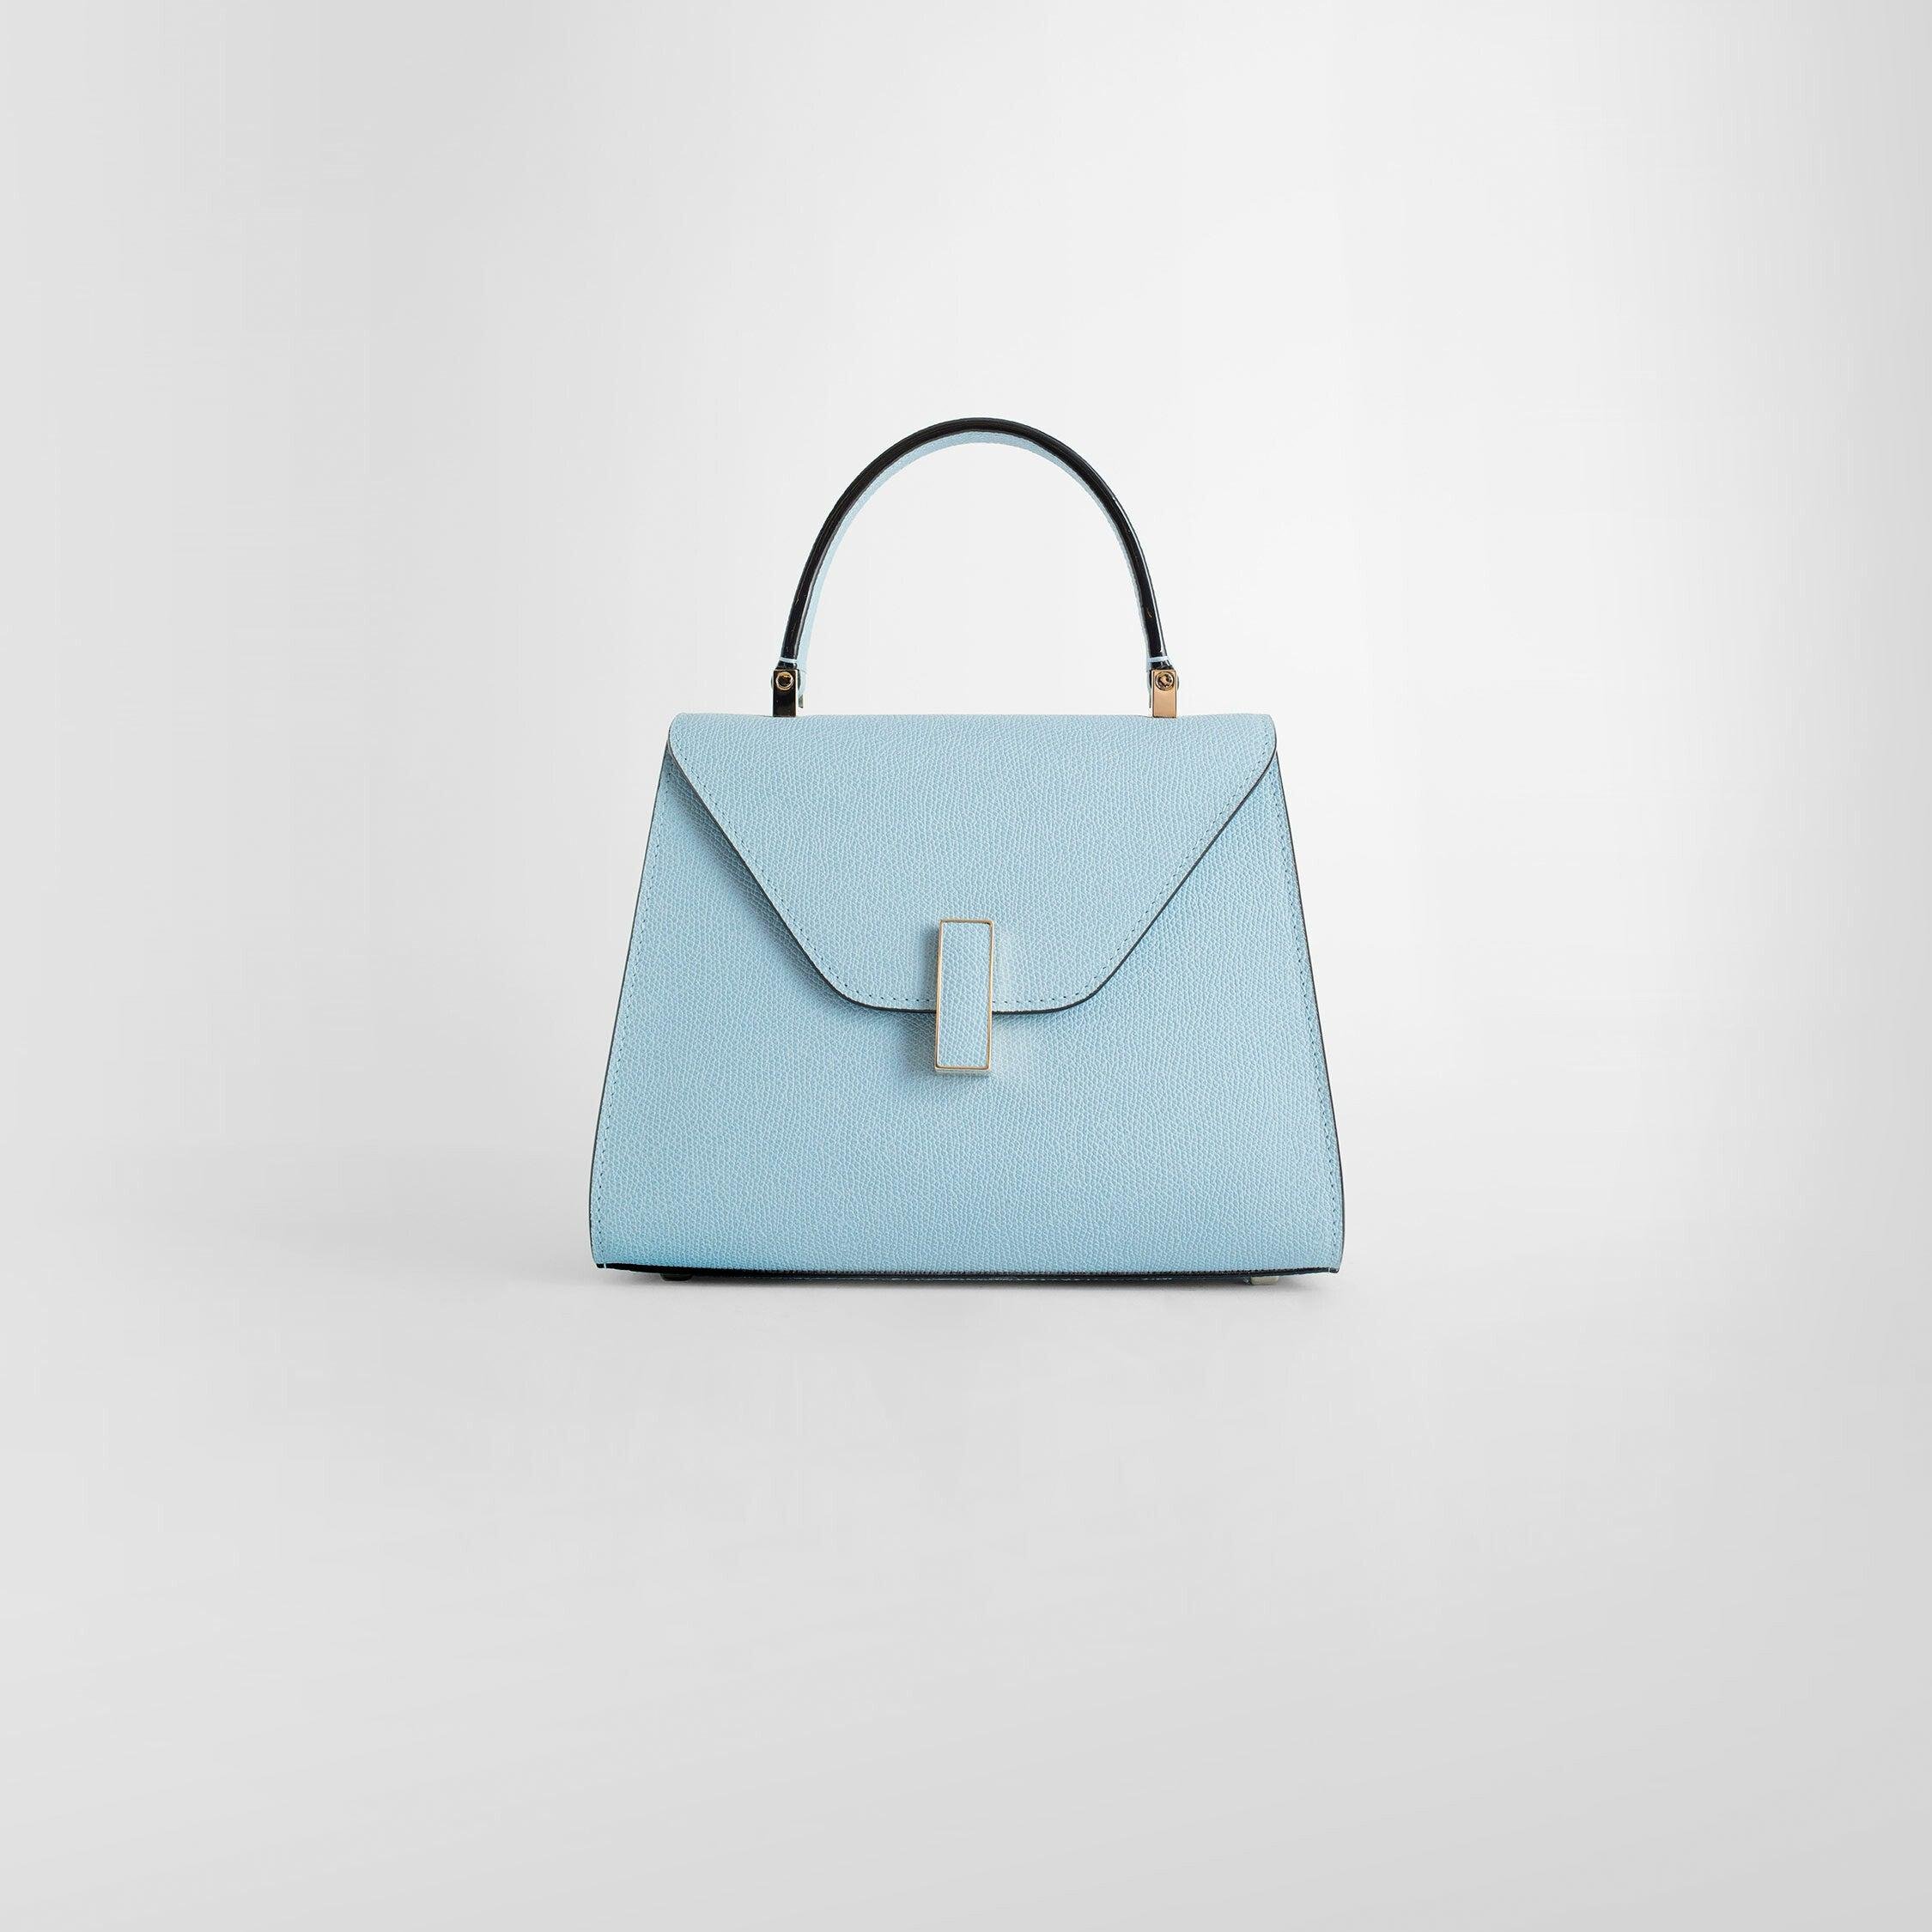 VALEXTRA WOMAN BLUE TOP HANDLE BAGS by VALEXTRA